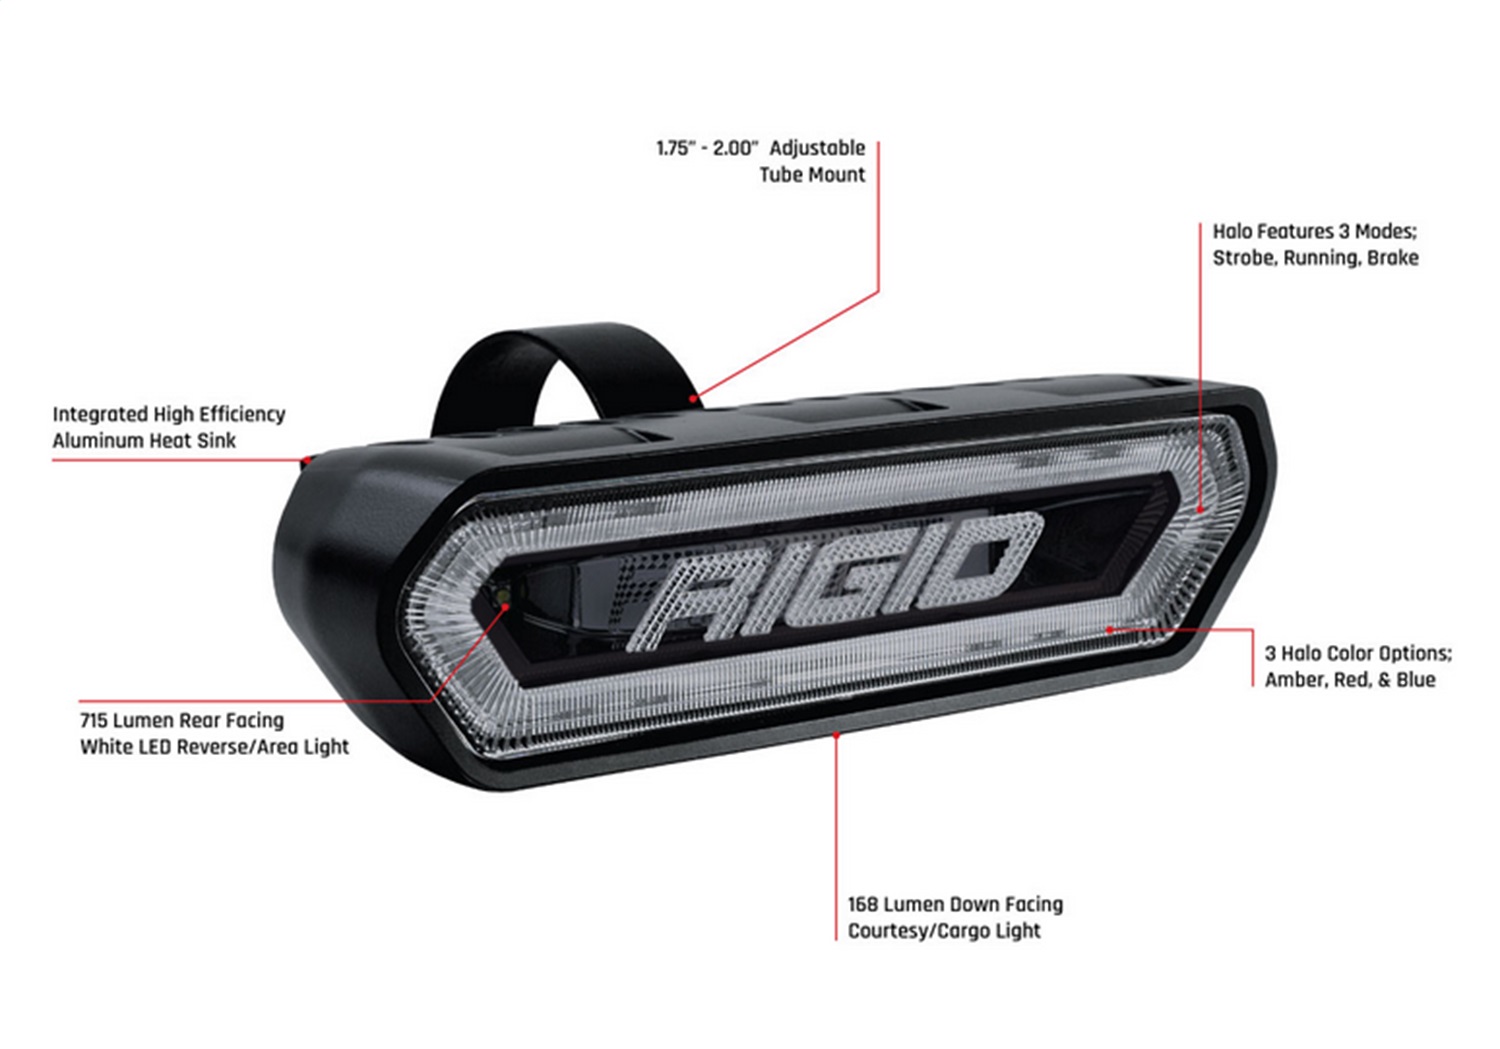 Rigid Industries 90133 Chase Exterior LED Light